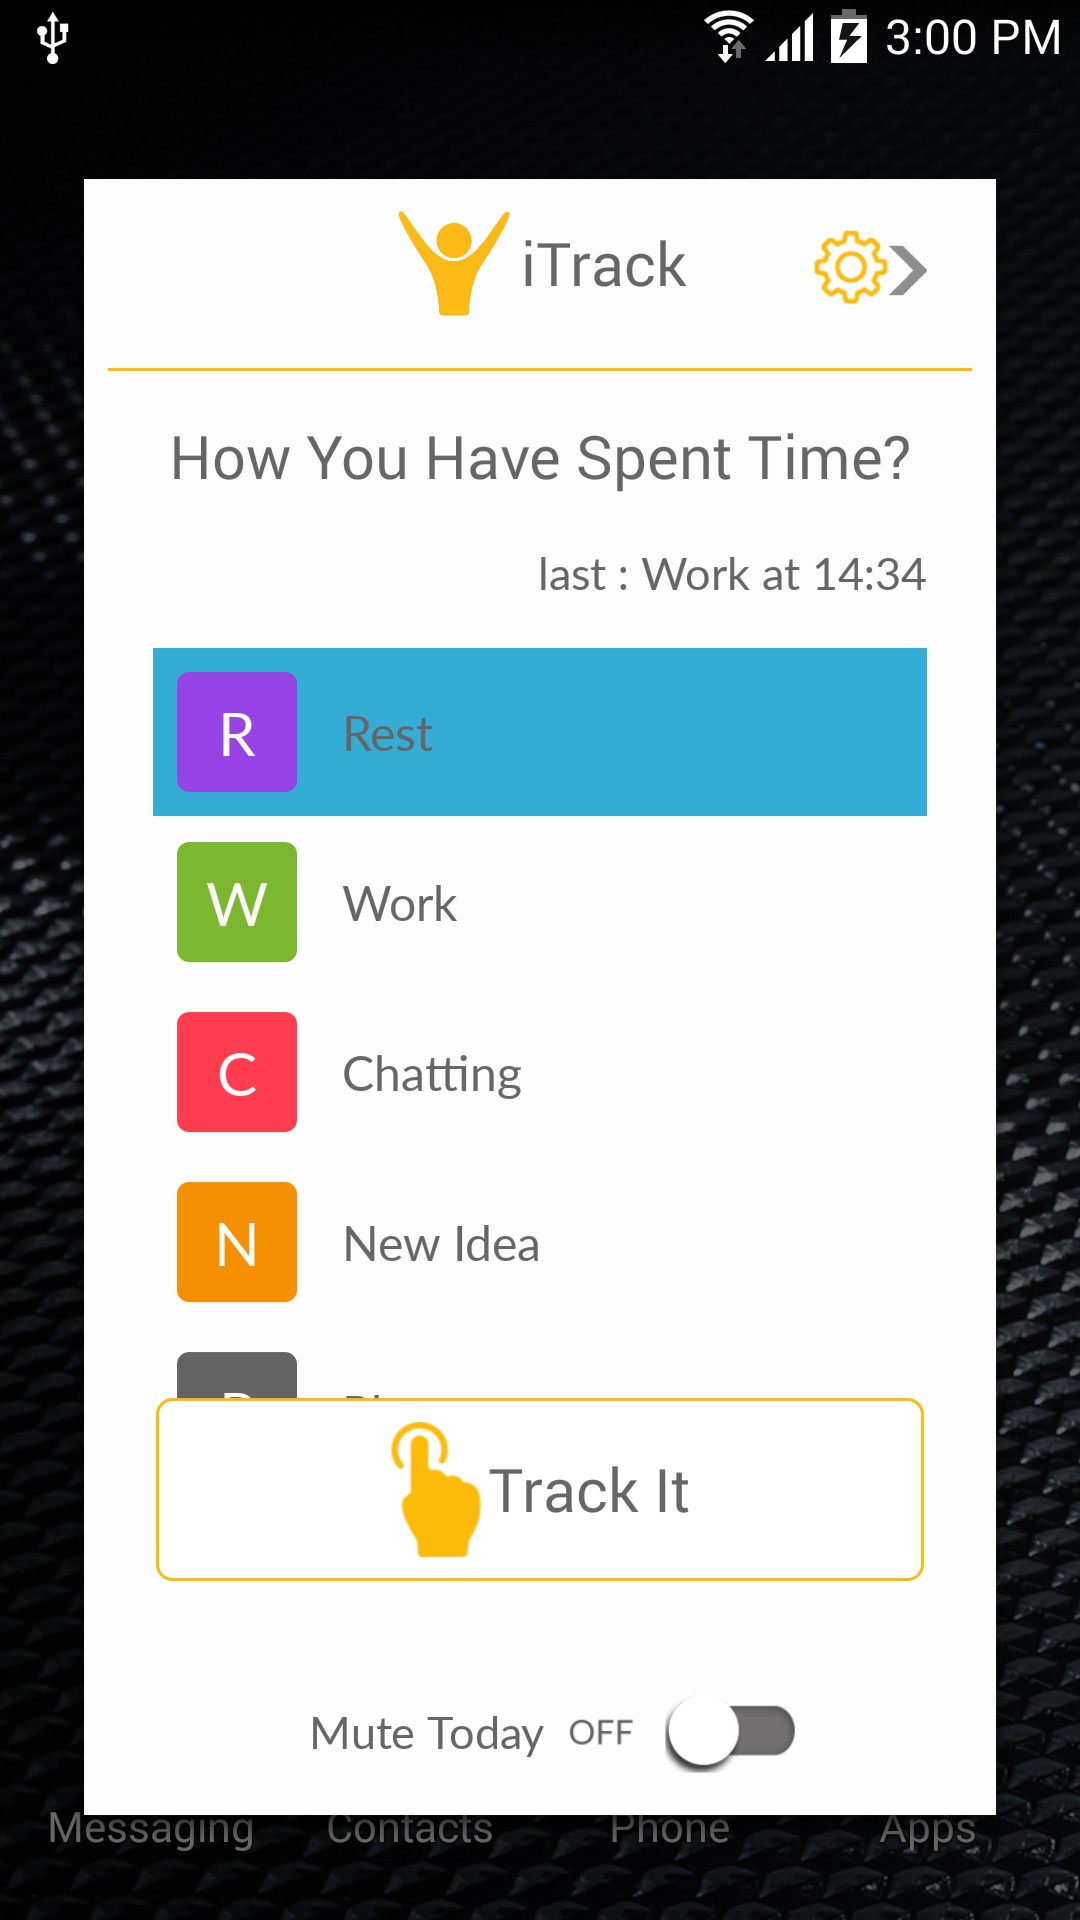 iTrack - Track Your Focus